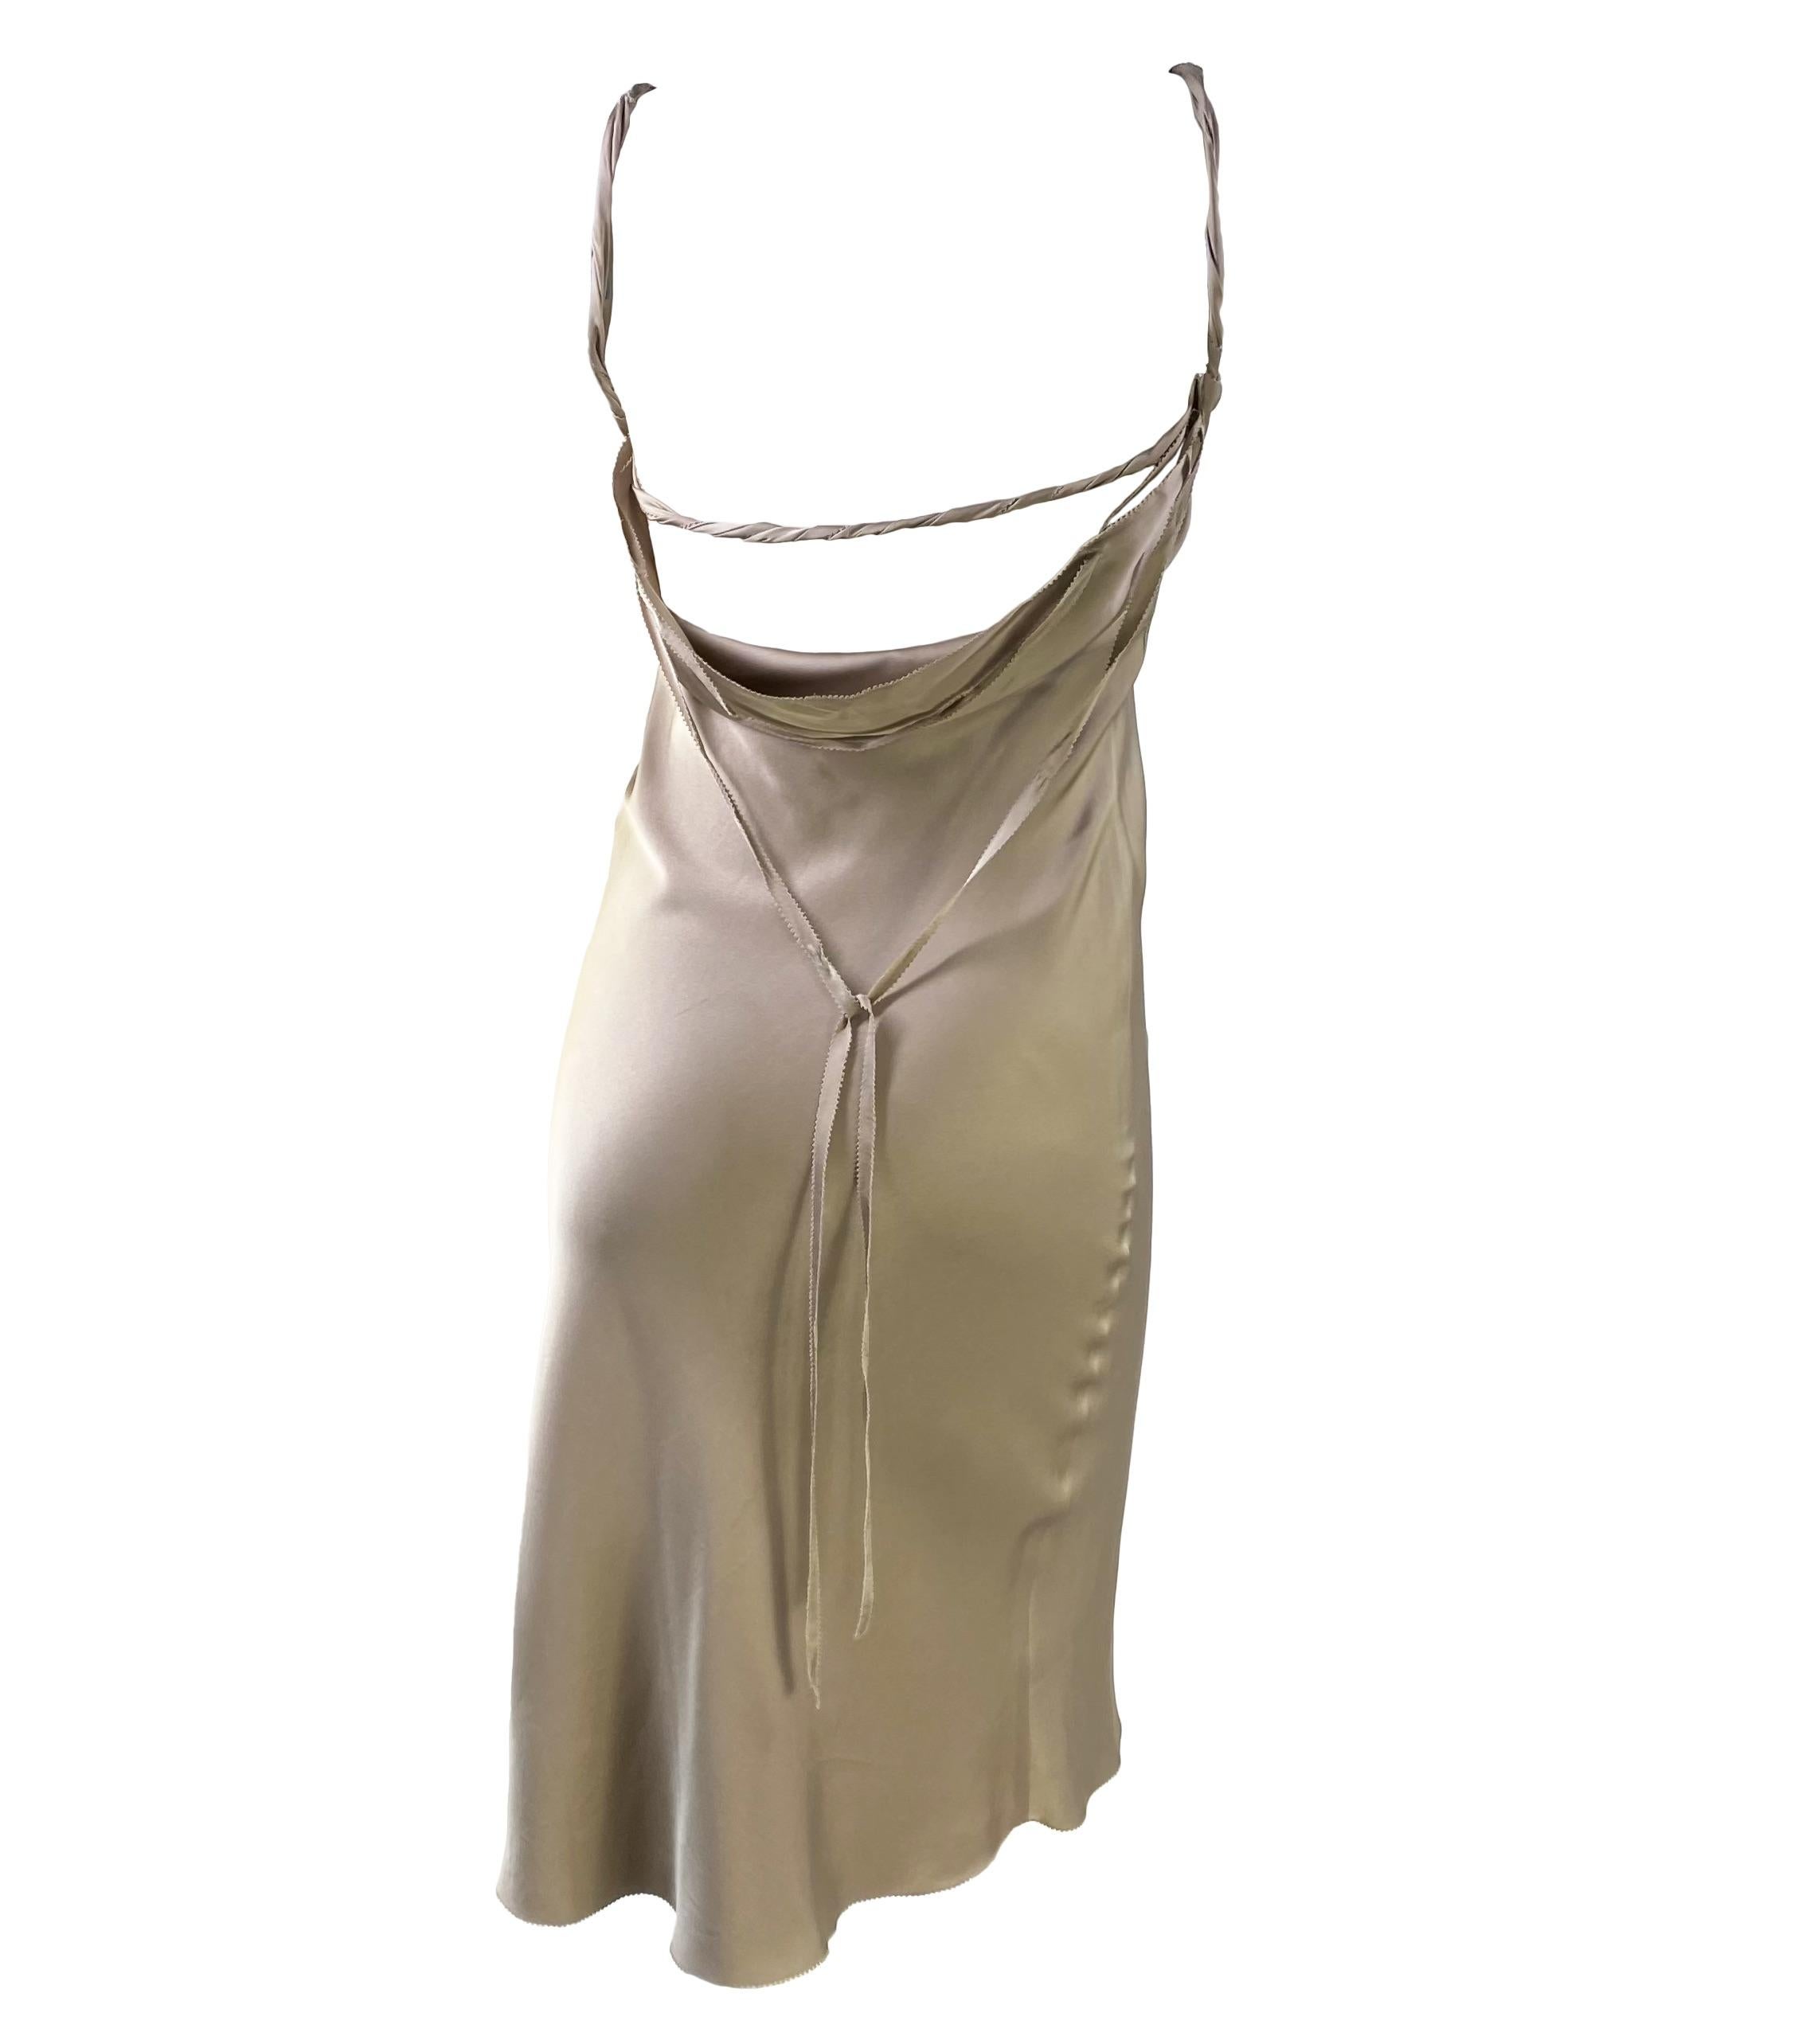 Presenting a gorgeous taupe satin silk Gucci dress, designed by Tom Ford. From the Fall/Winter 2002 collection, this beautiful mid-length dress features a v-neckline, rolled straps, and an open cowl back with a lace tie. A step away from Ford's